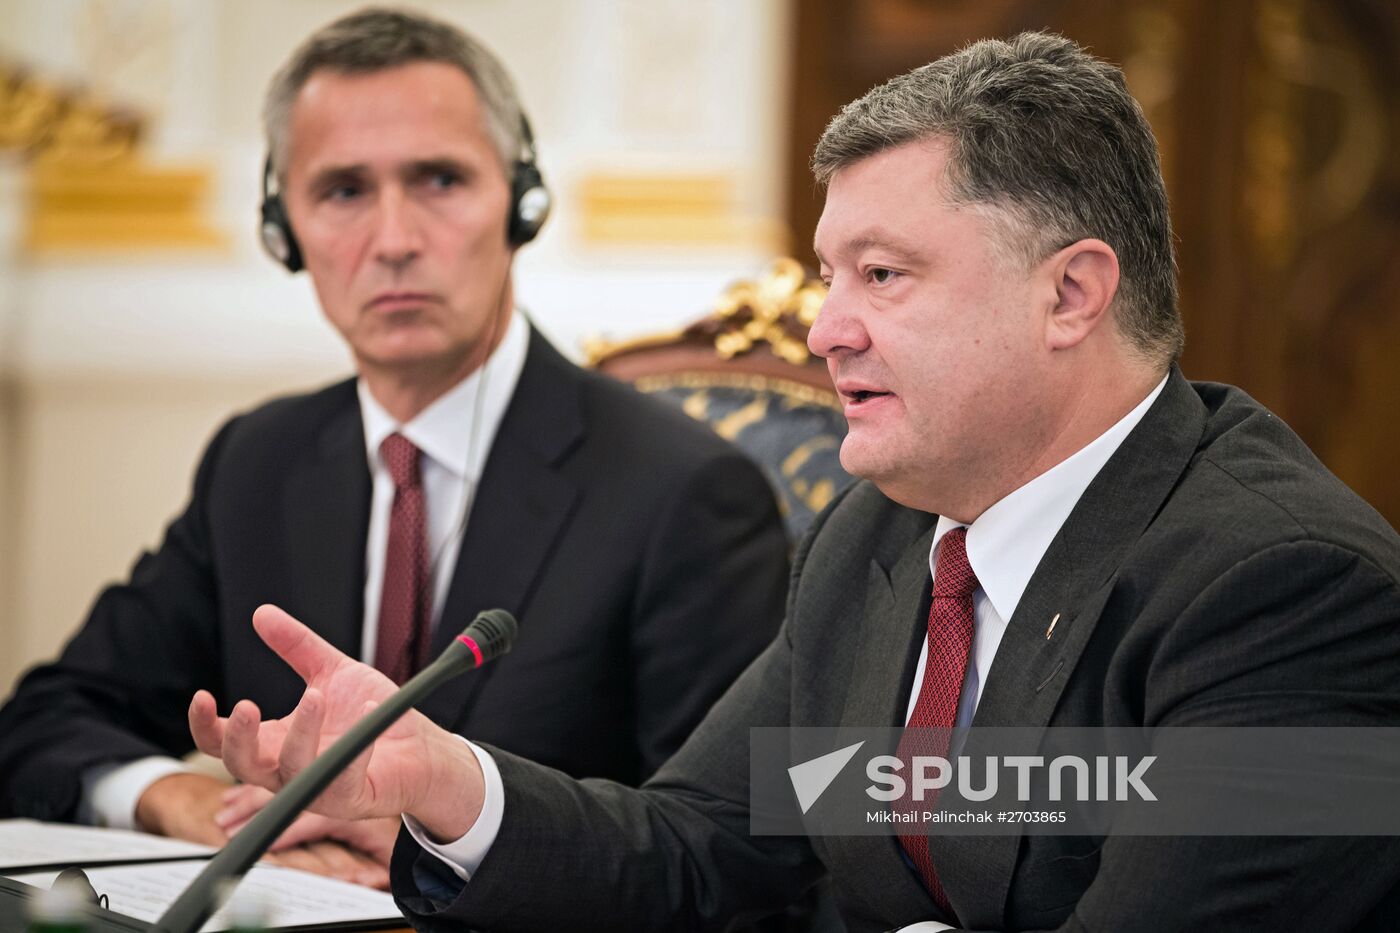 National Defense and Security Council meets in Kiev